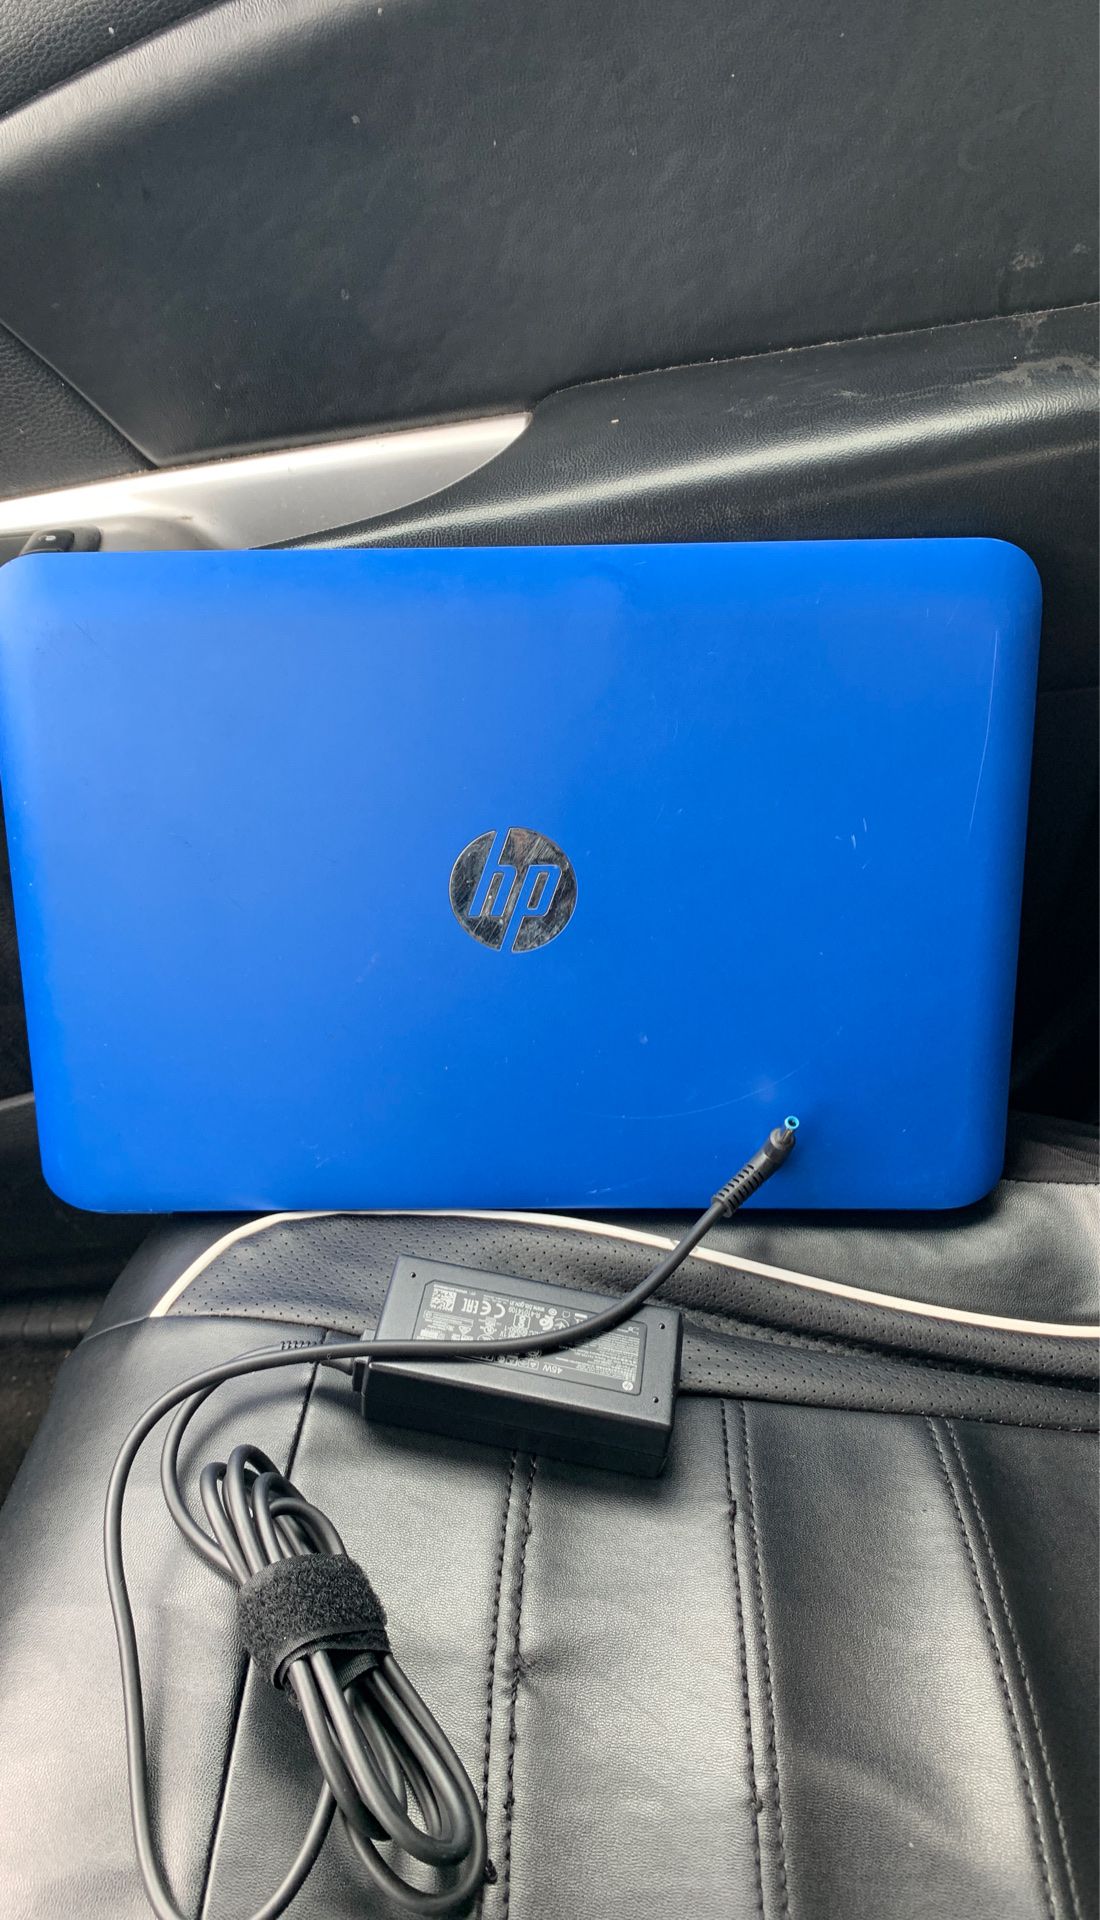 HP laptop excellent condition works good Touchscreen it’s all cleaned out for the next user